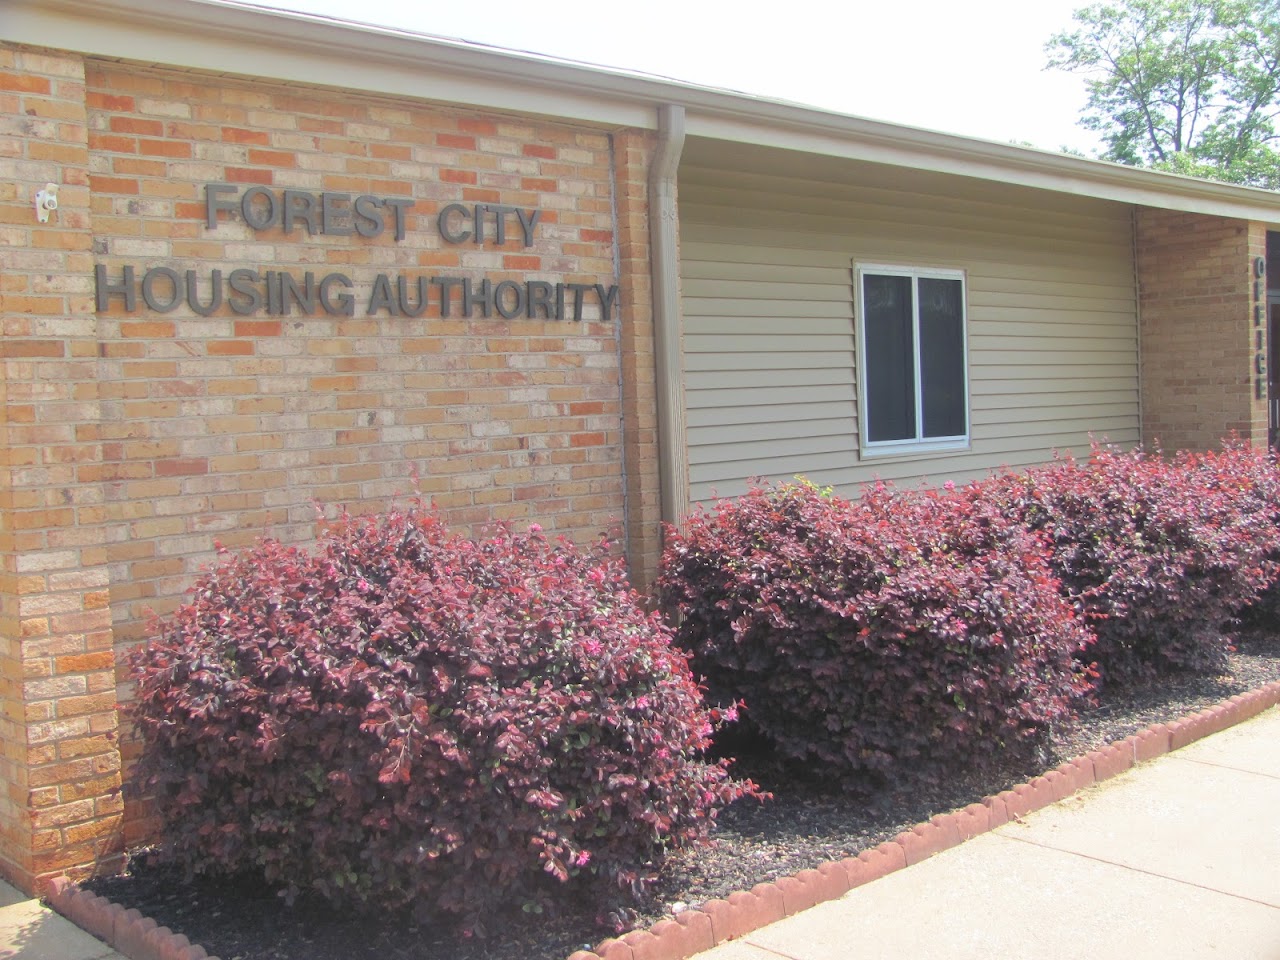 Photo of Forest City Housing Authority. Affordable housing located at 147 E SPRUCE Street FOREST CITY, NC 28043